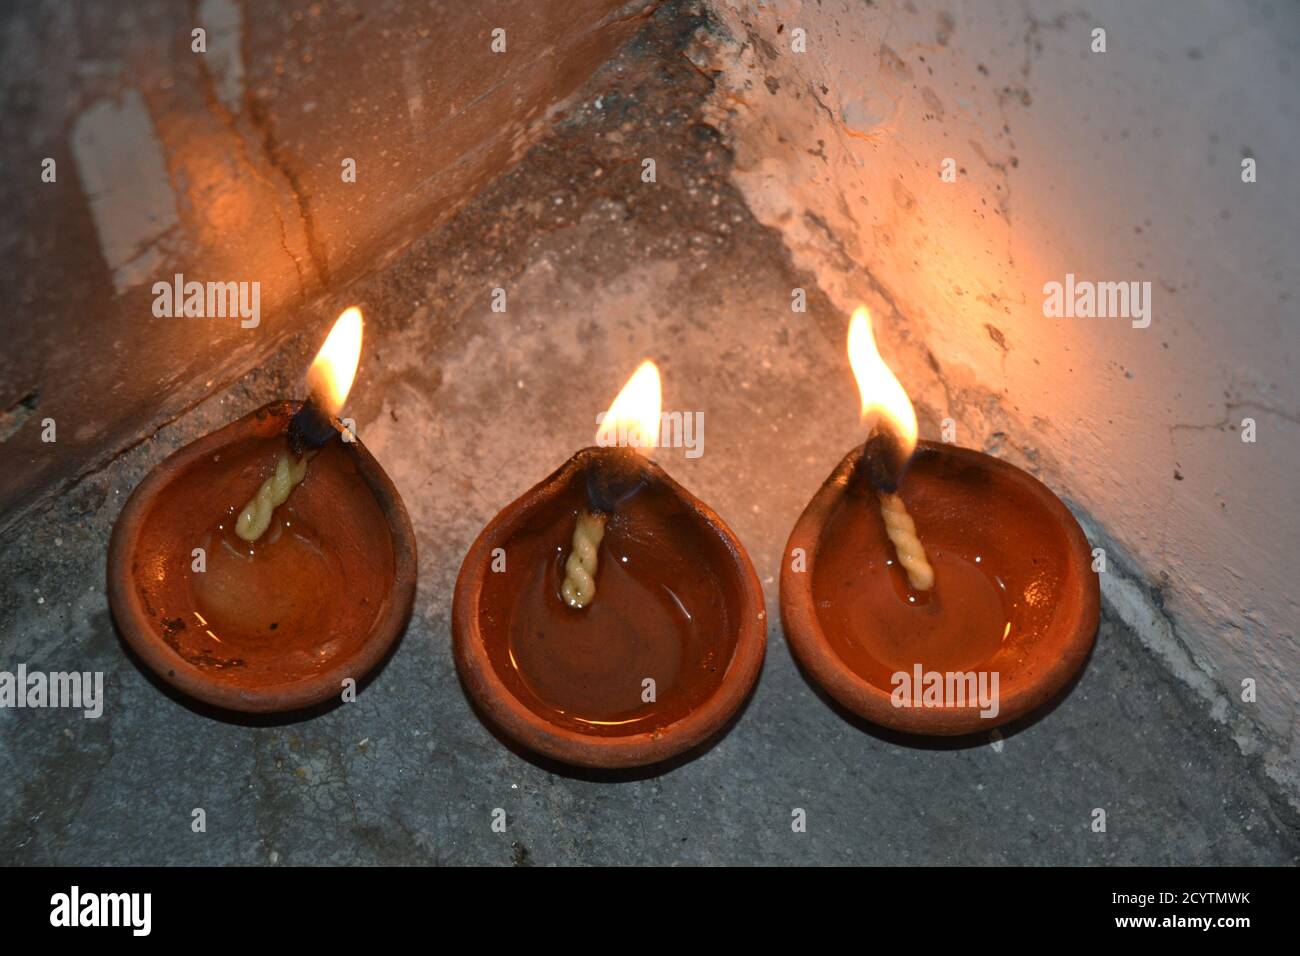 Oil lamps with flame. deepawali or diwali is celebrated by hindus by lighting the oil lamps. Stock Photo